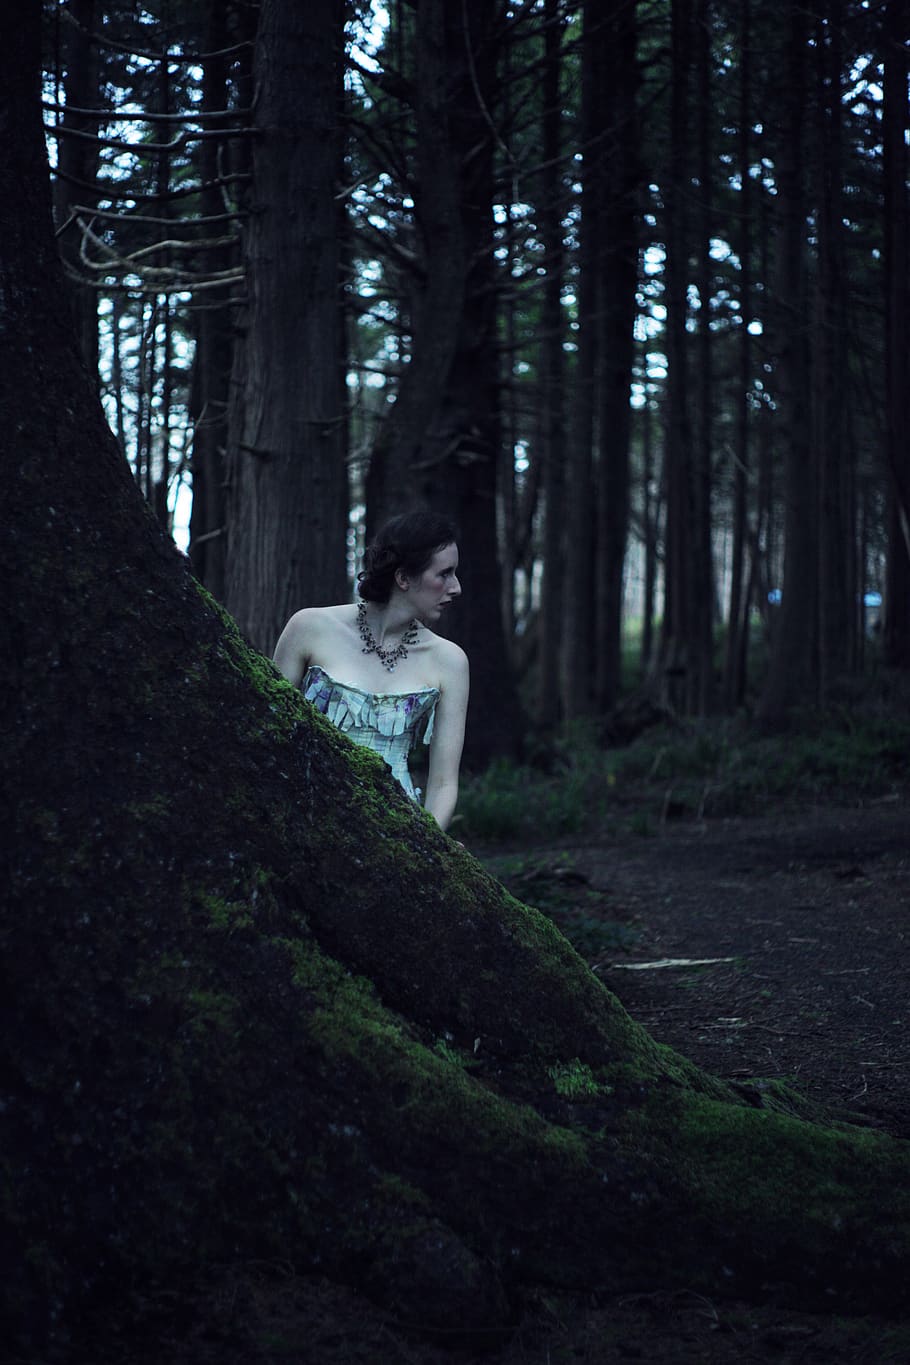 girl, woman, woods, night, creepy, forest, gloomy, scary, atmosphere, mood